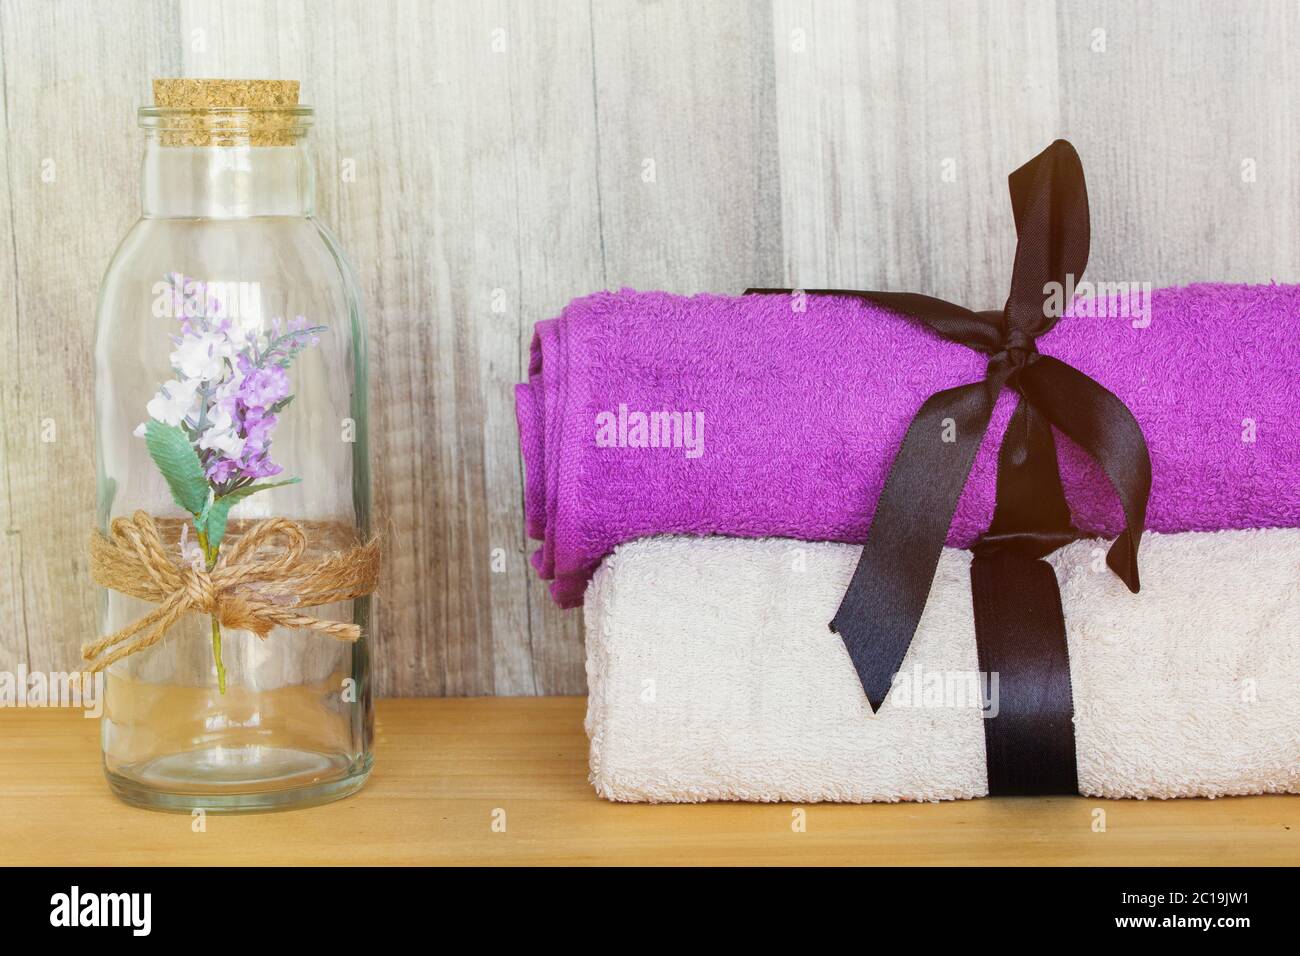 Towels with decorative bottle. Beauty Spa Health and Wellness concept. Stock Photo